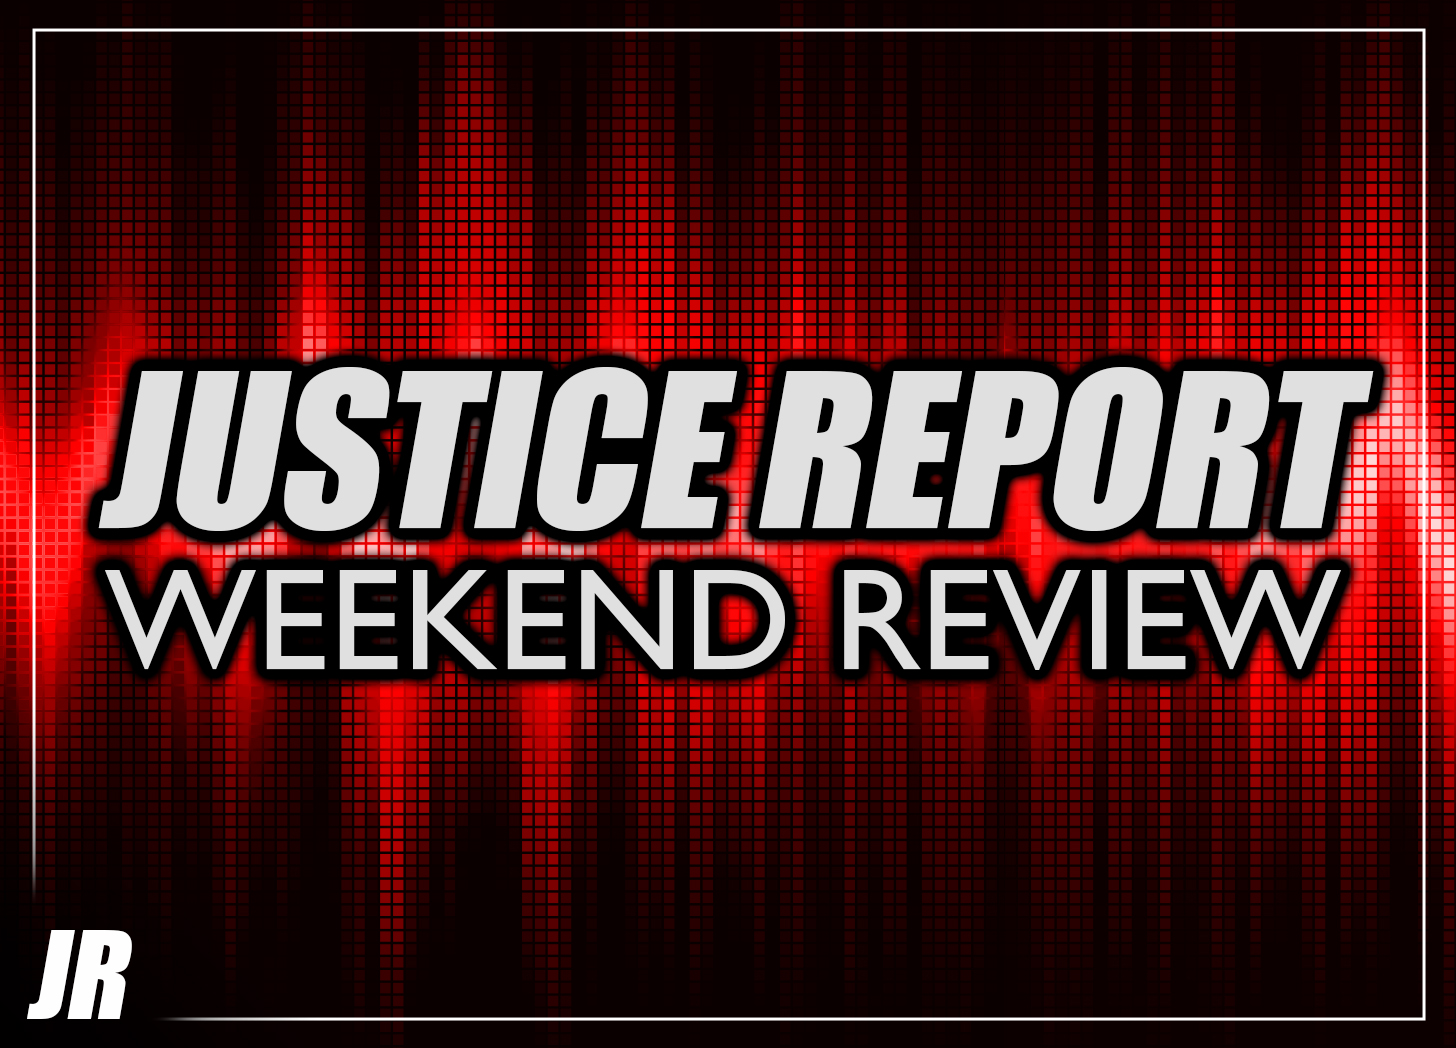 Justice Report Weekend Review #1